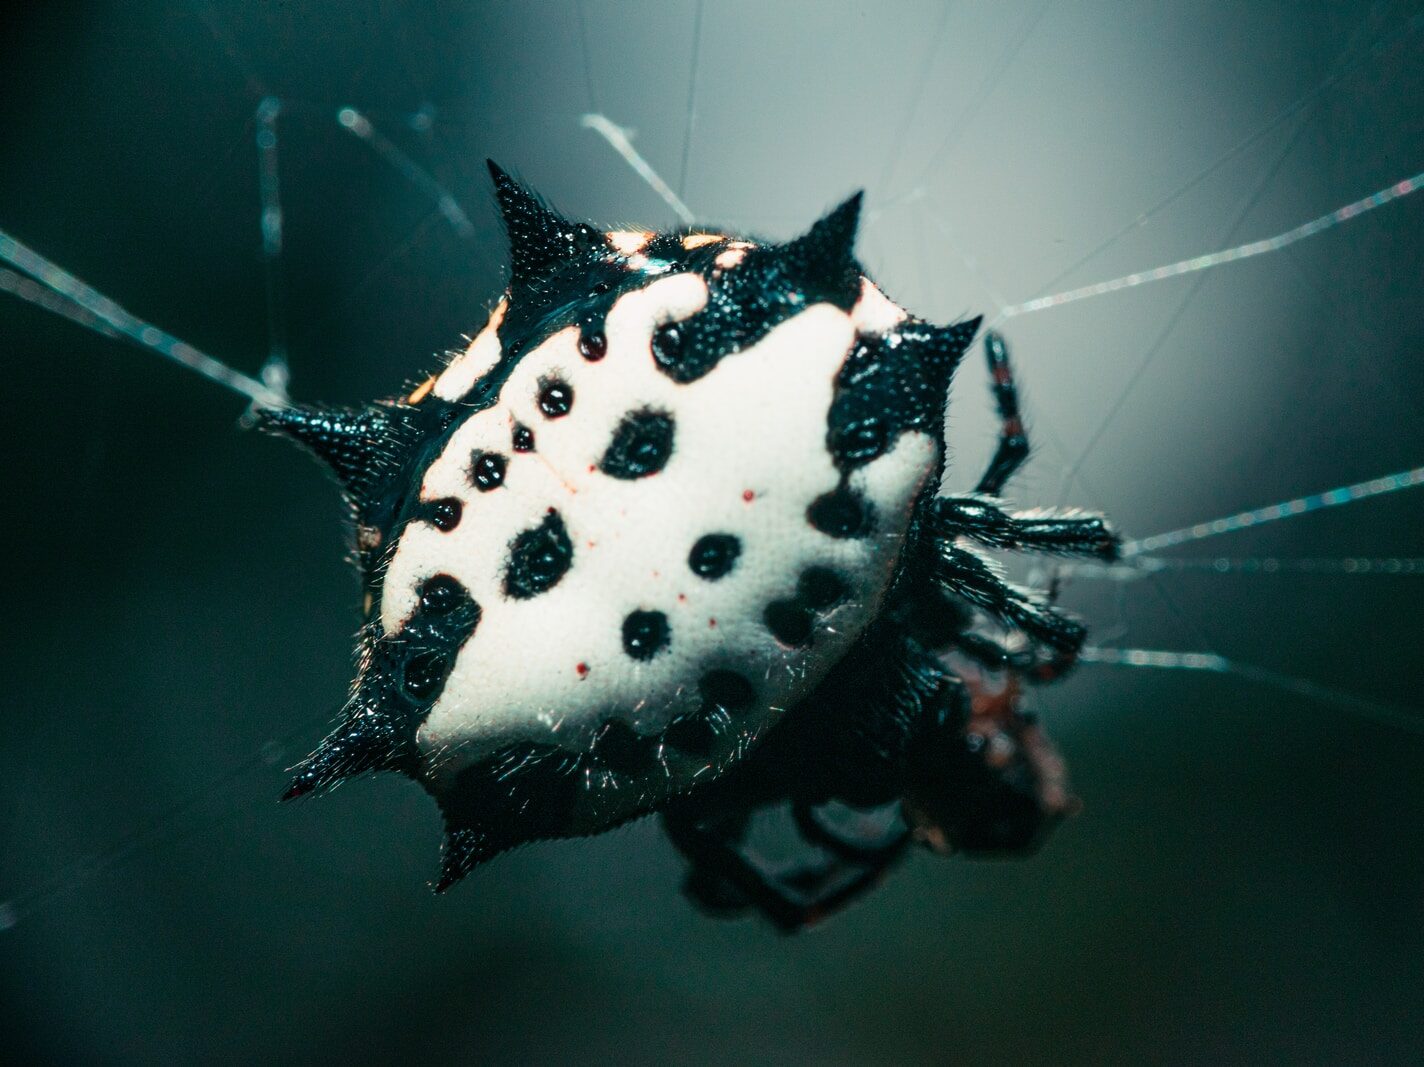 black and white spotted spider web in close up photography